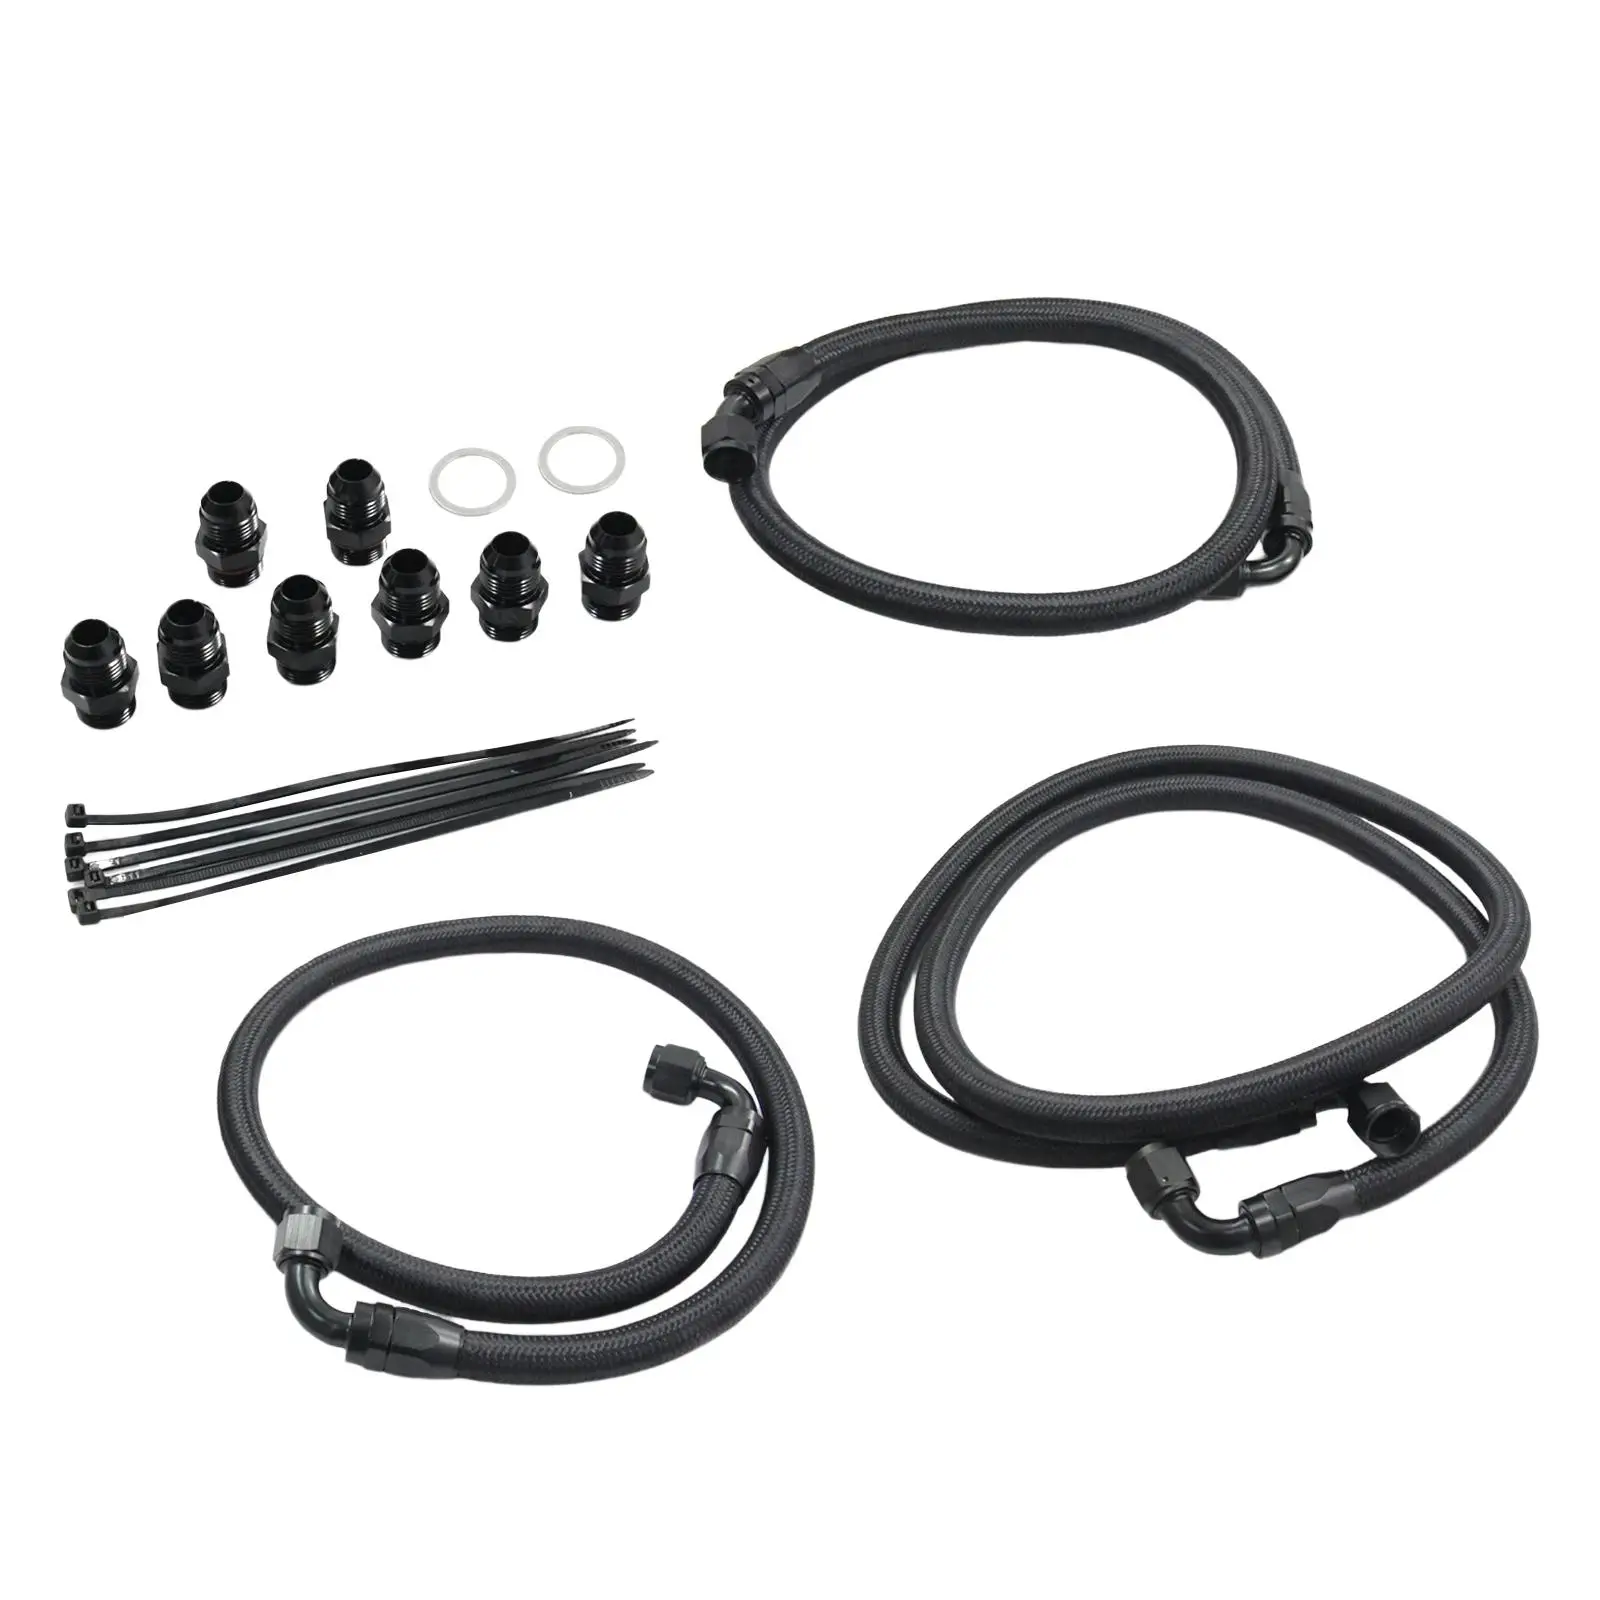 Hose Fitting Kit Replacement Professional Flexible Tube Pipe Car for Chevrolet